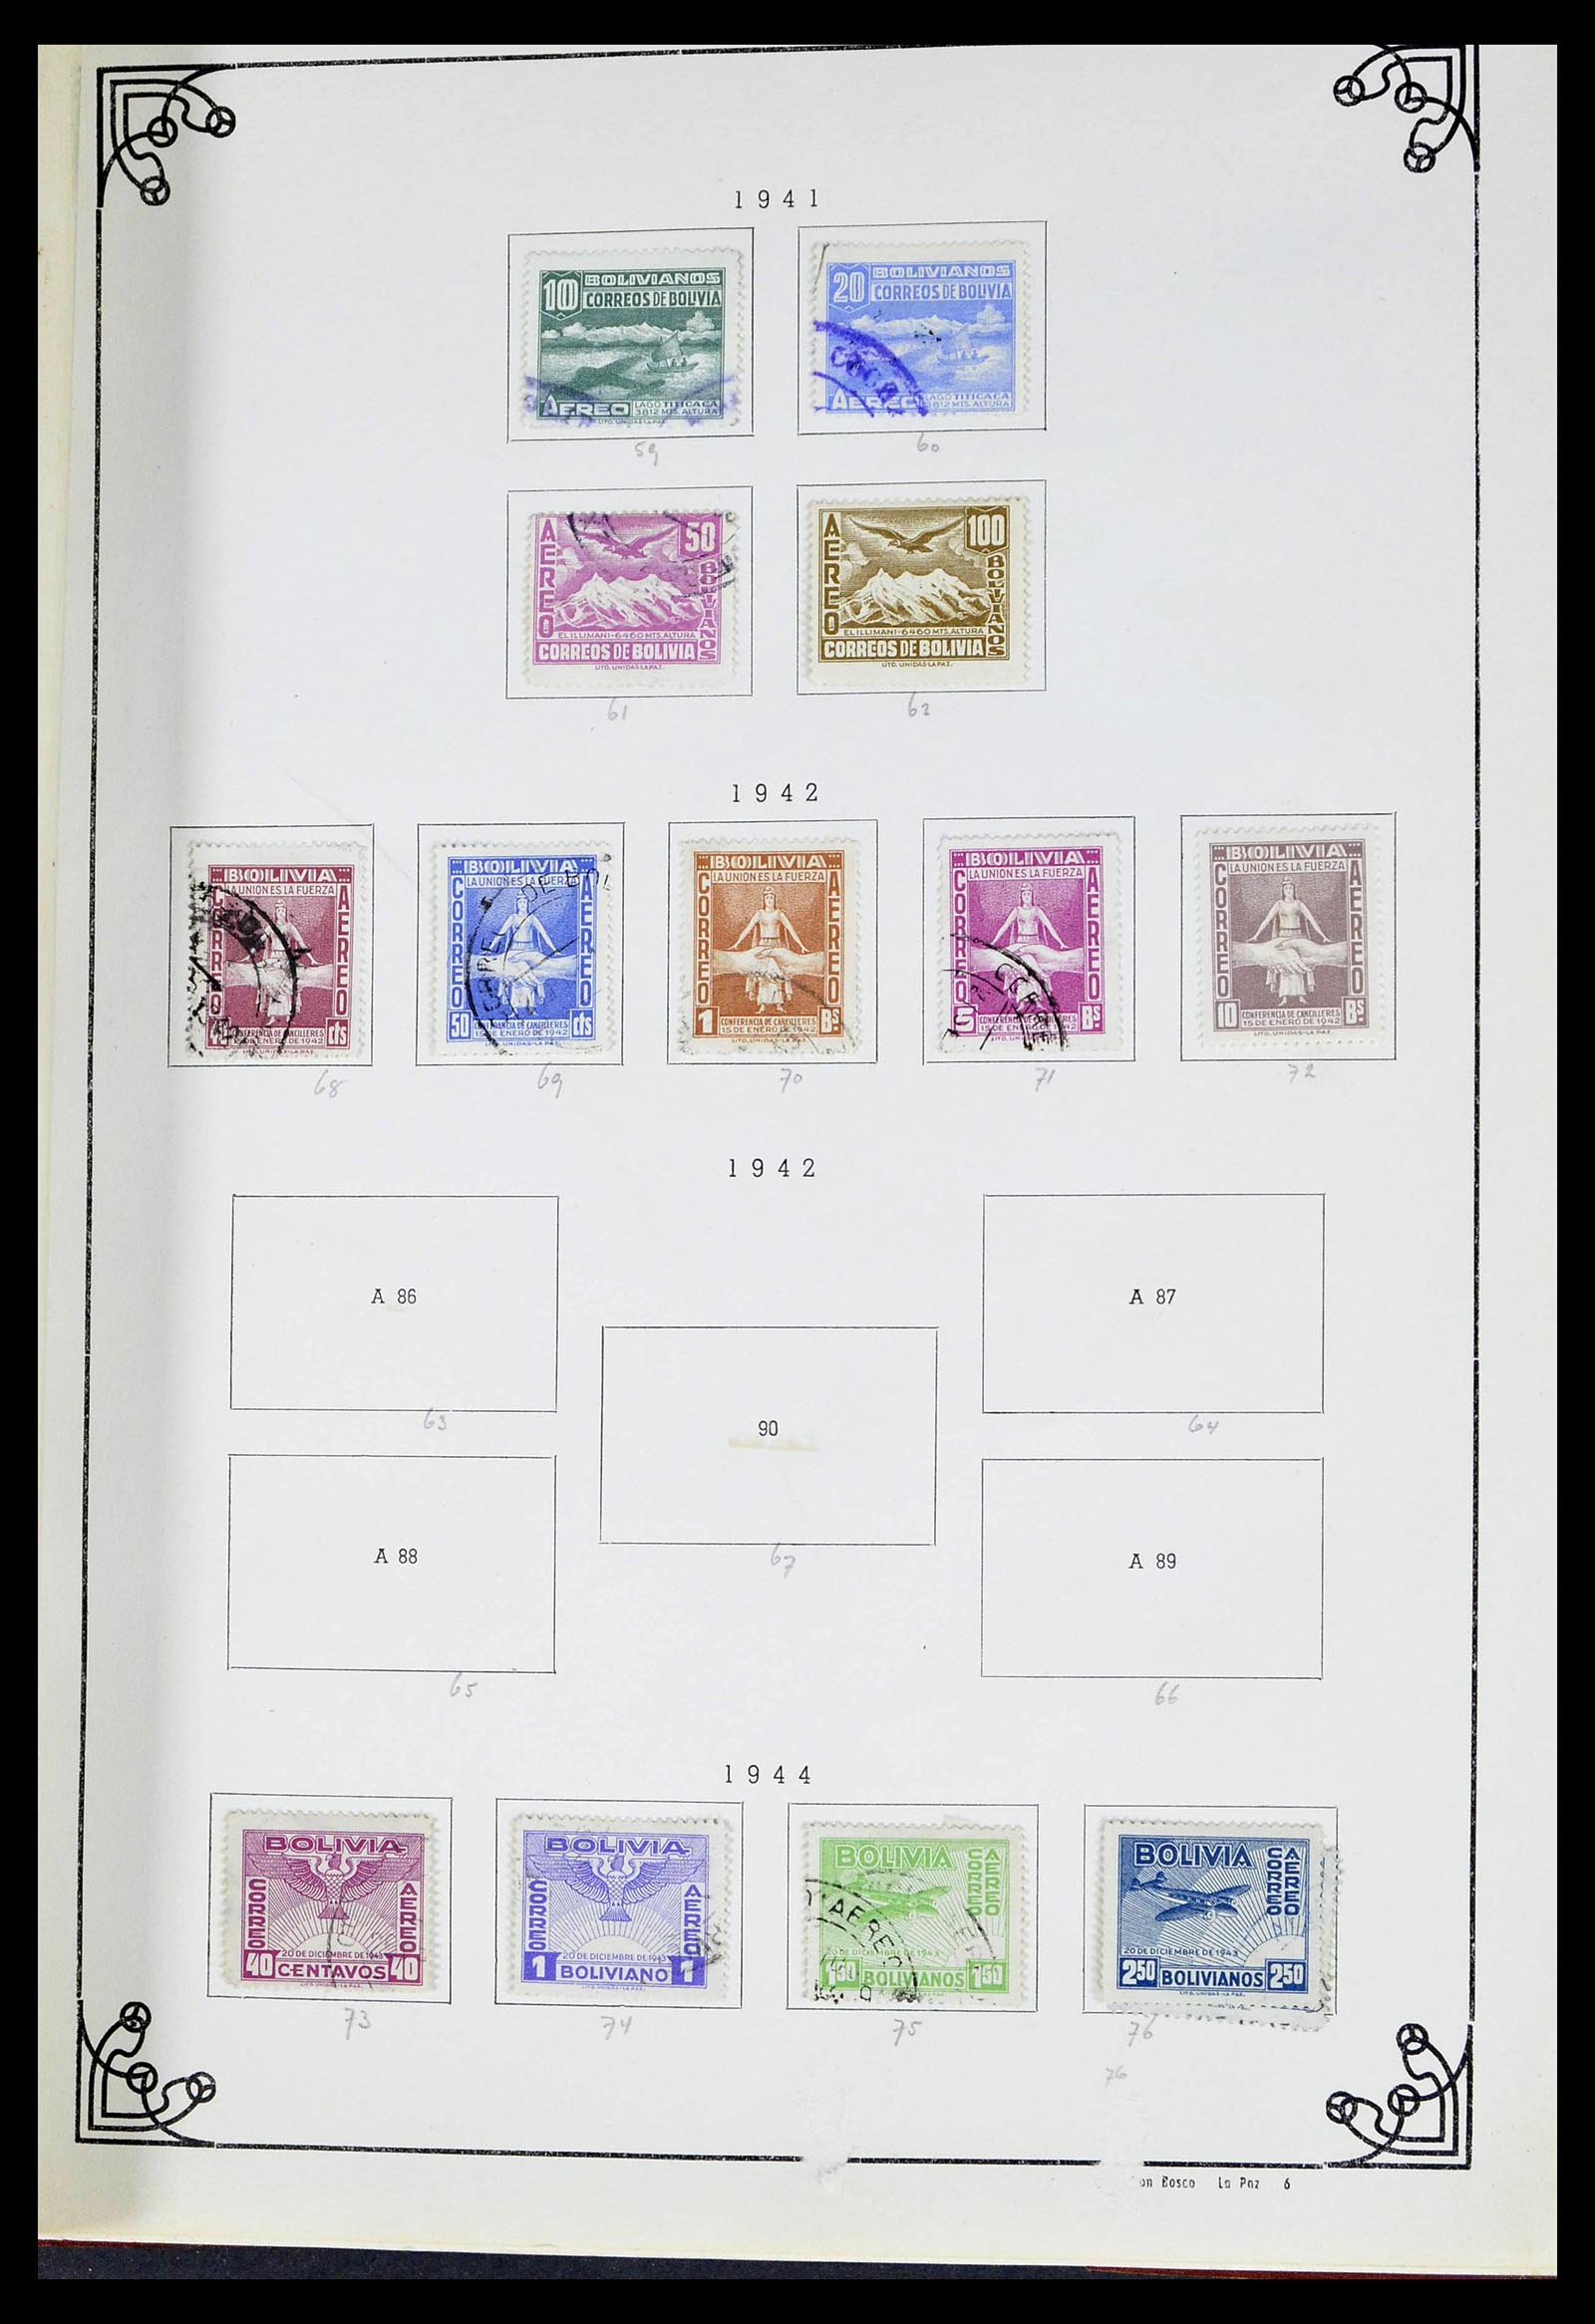 39224 0049 - Stamp collection 39224 Bolivia 1849-1955.